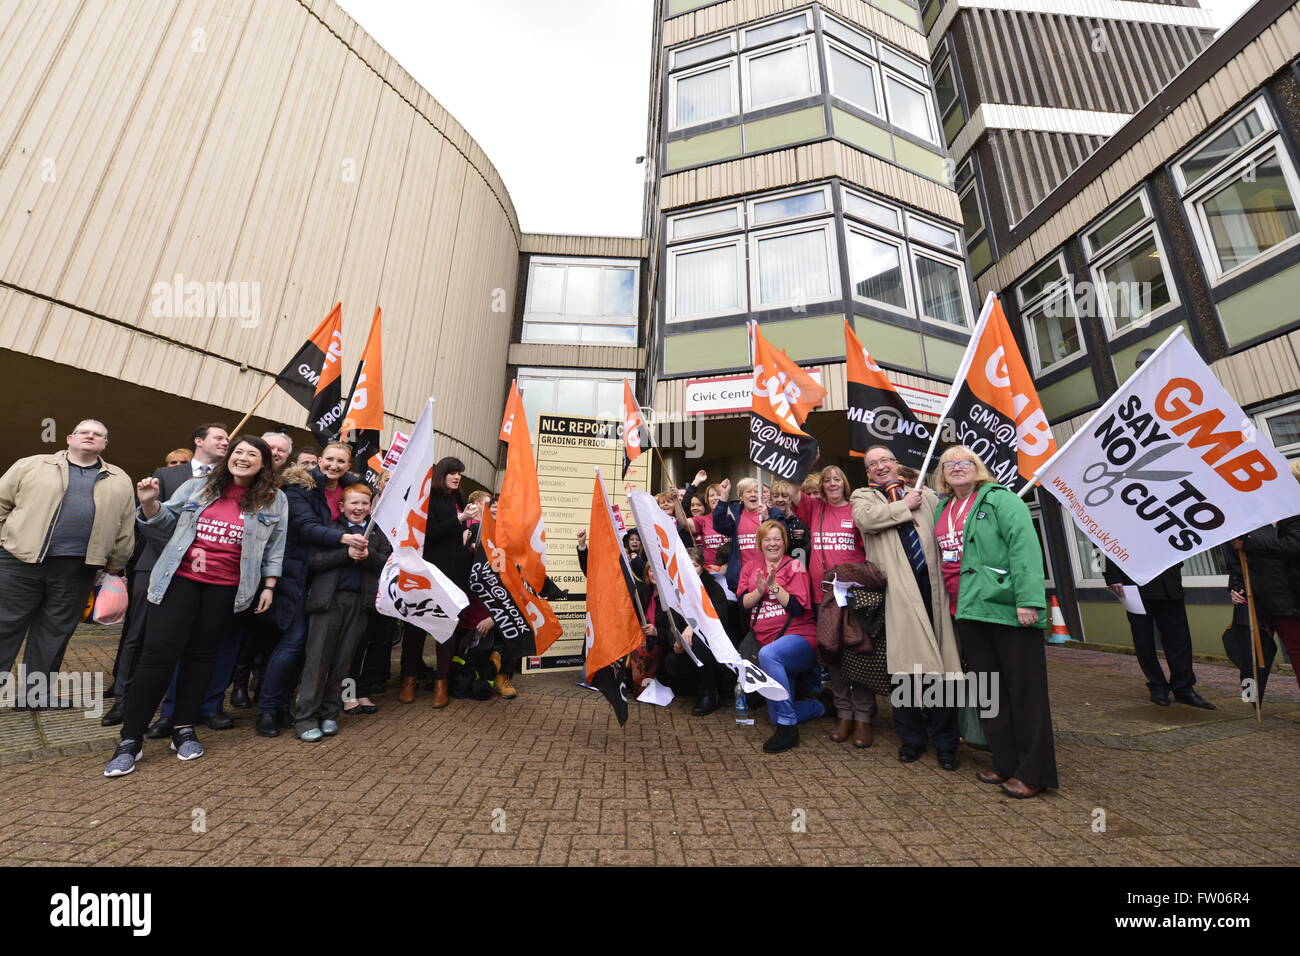 Motherwell, North Lanarkshire, GBR - 31 March: GMB Scotland members and supporters took part in a demonstration for equal pay on Thursday 31 March 2016 in Motherwell, North Lanarkshire. The Union is calling on North Lanarkshire council to settle their claims or face legal action. Stock Photo